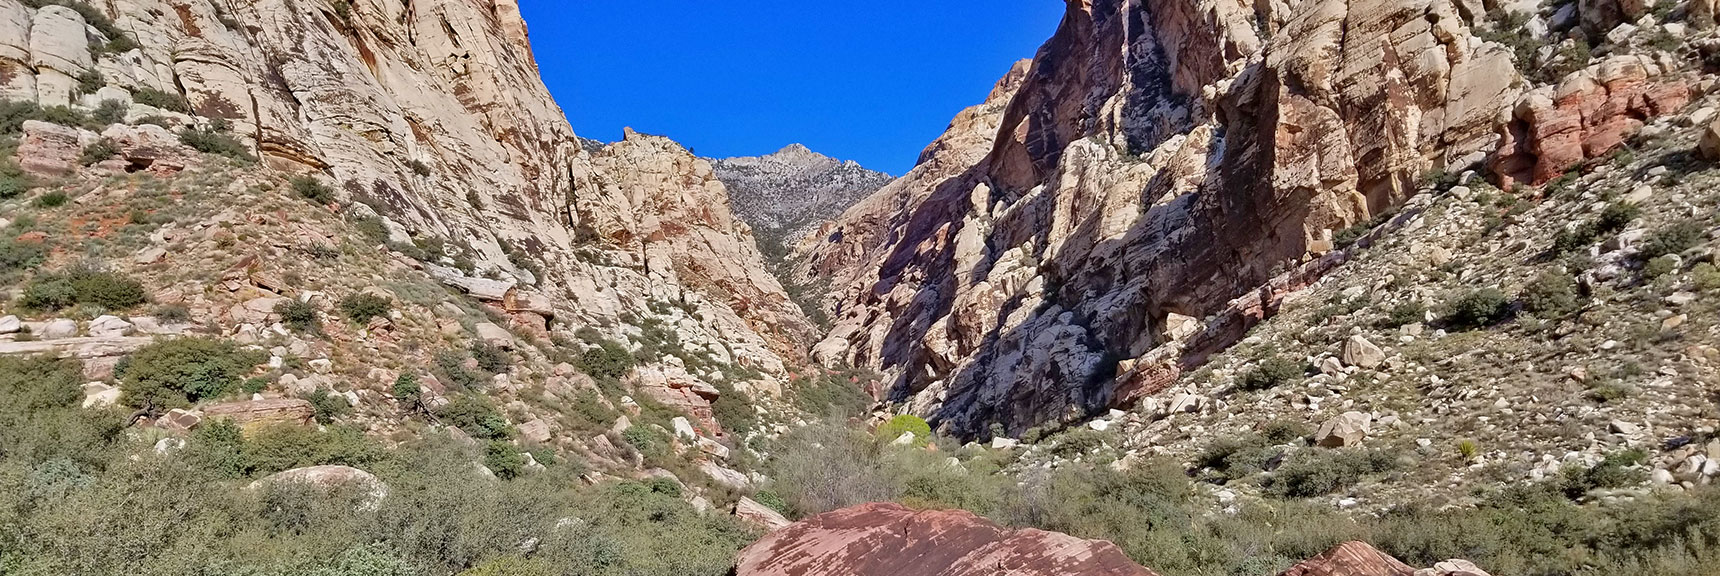 First Creek Canyon Between Indecision Peak and Mt. Wilson in Rainbow Mountain Wilderness, Nevada